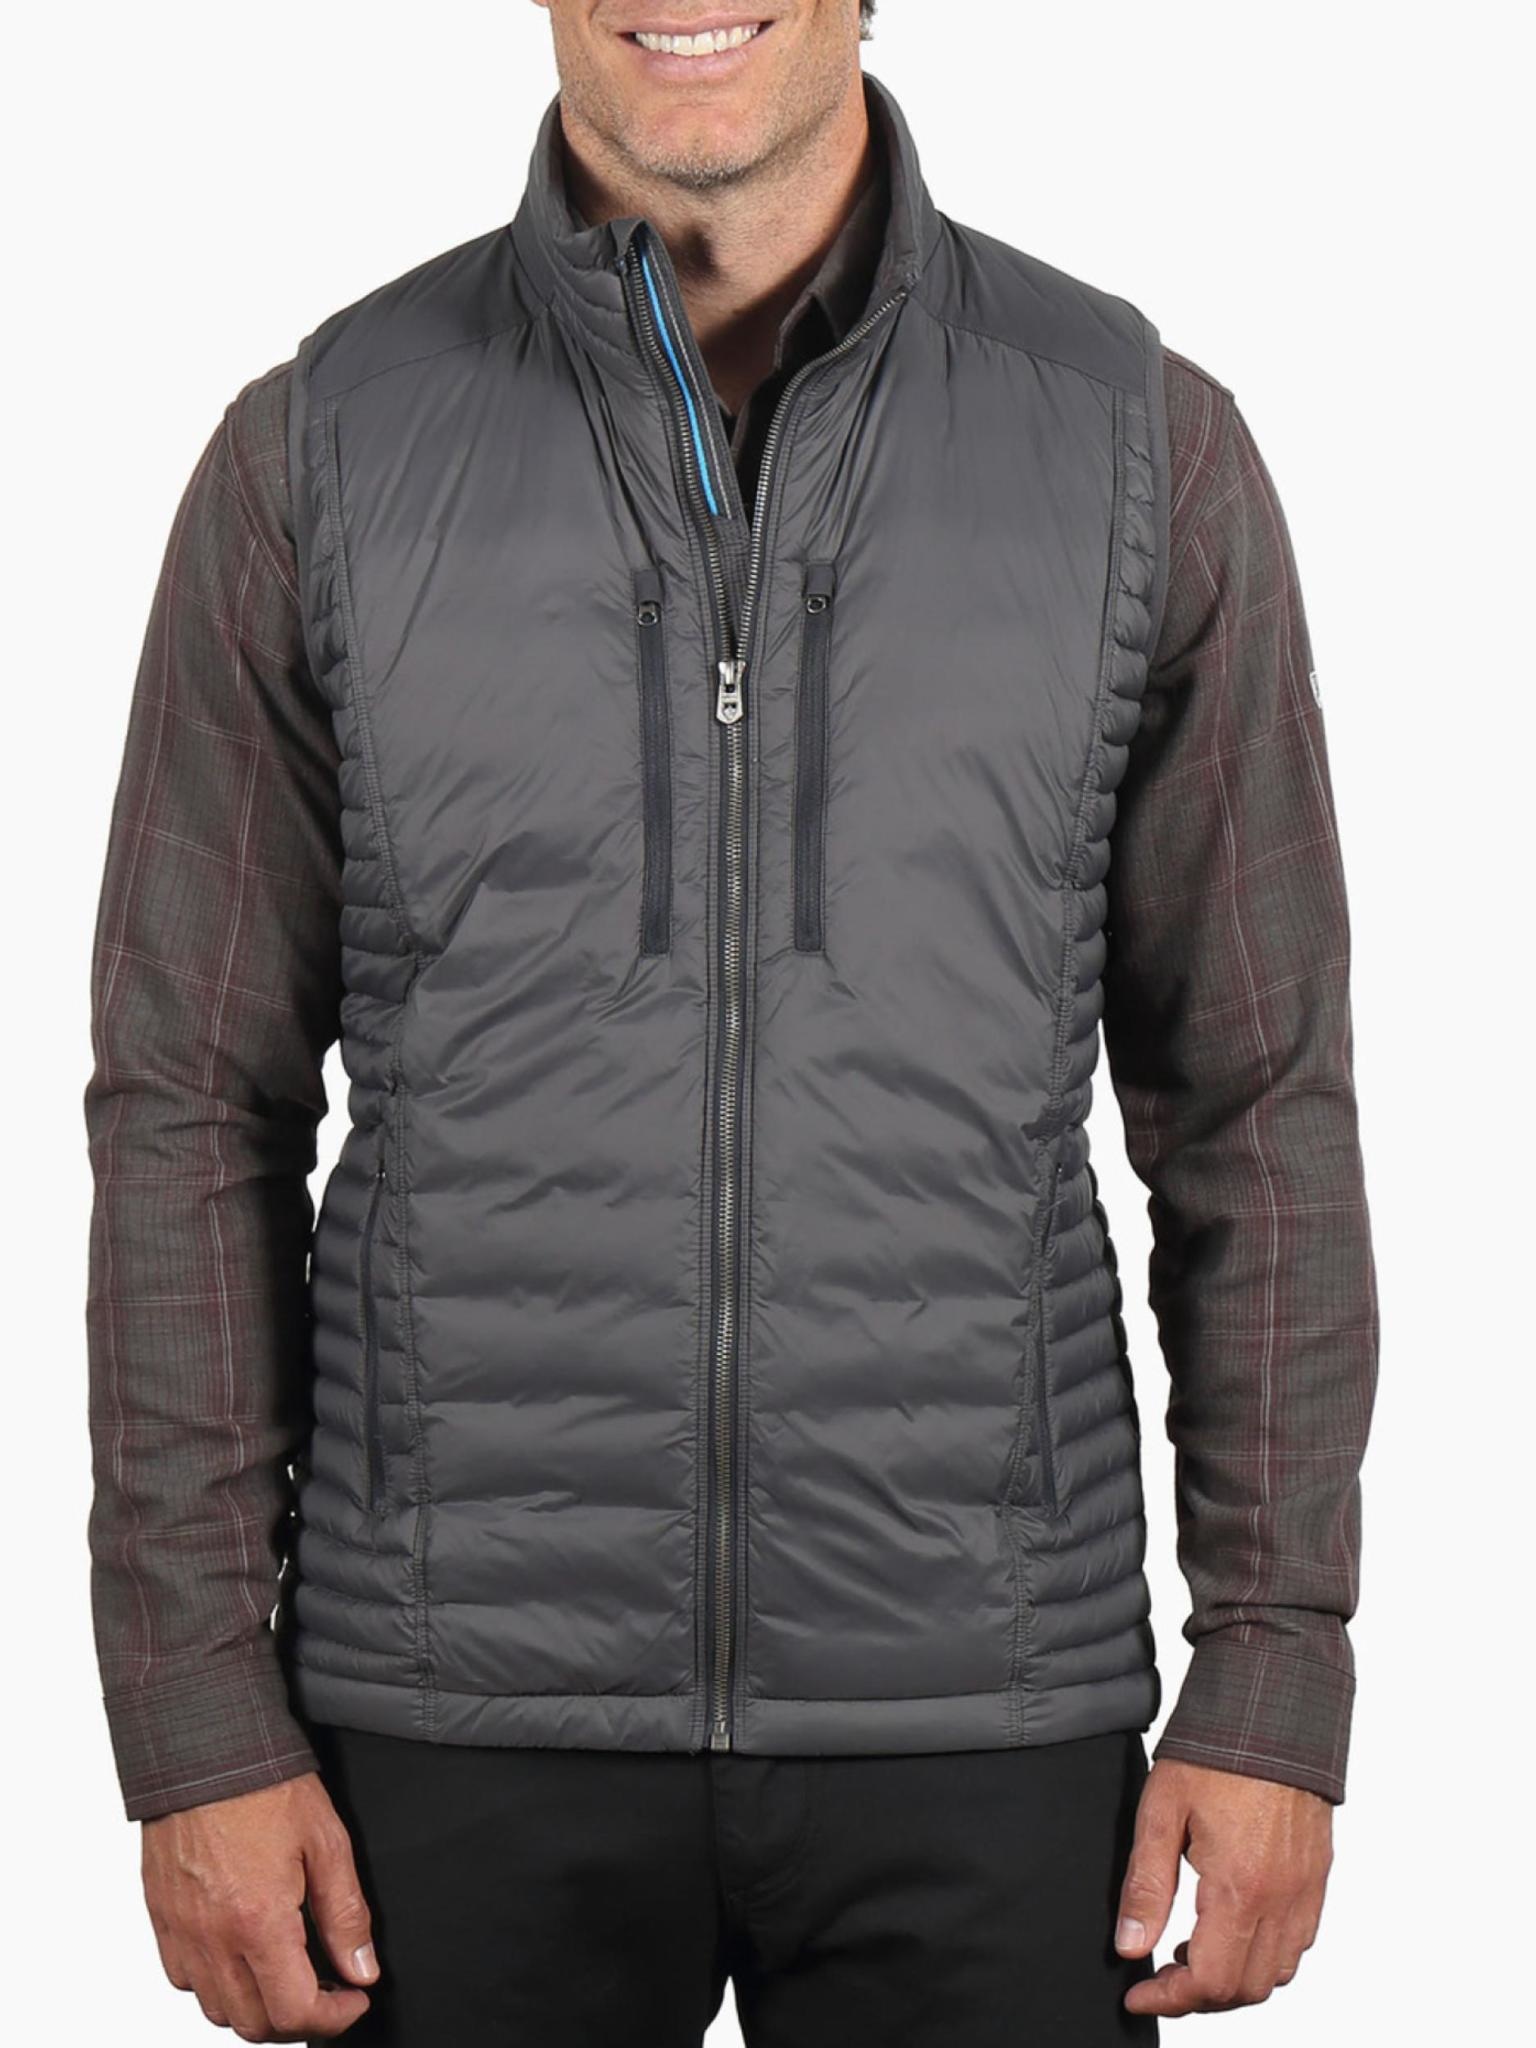 Men's Spyfire Vest - Chatham Outfitters